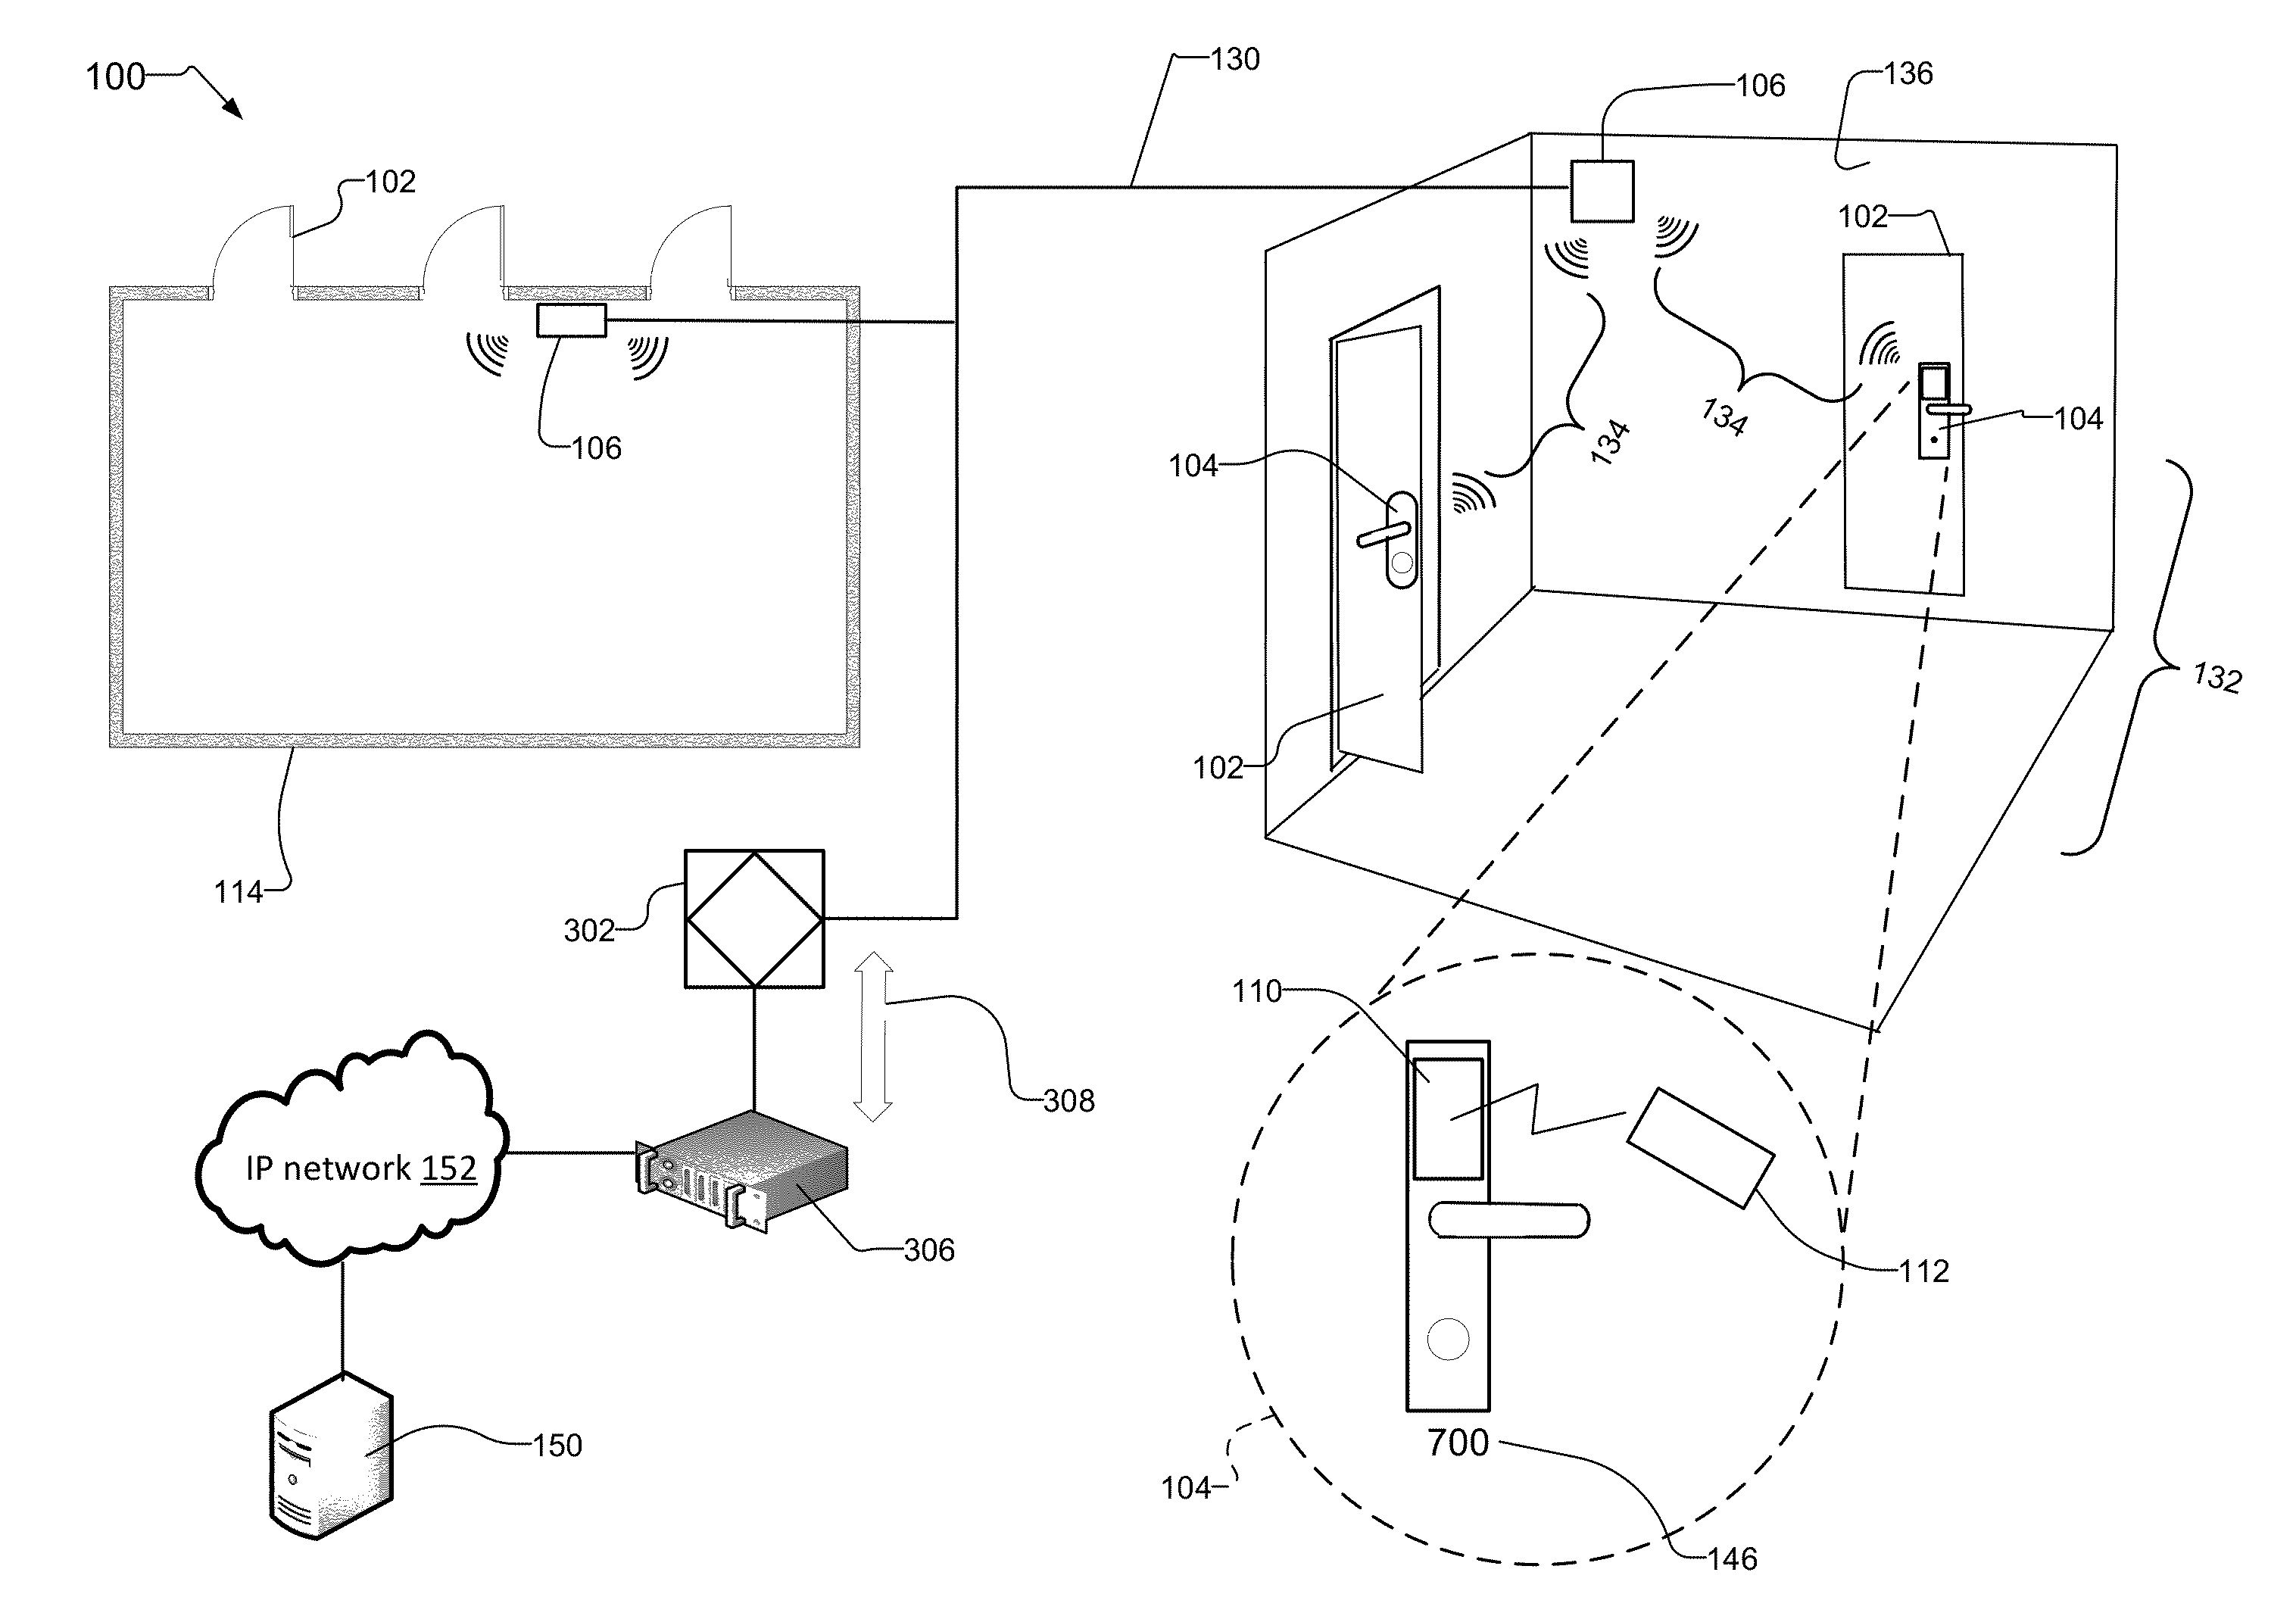 Method and System for Self-discovery and Management of Wireless Security Devices